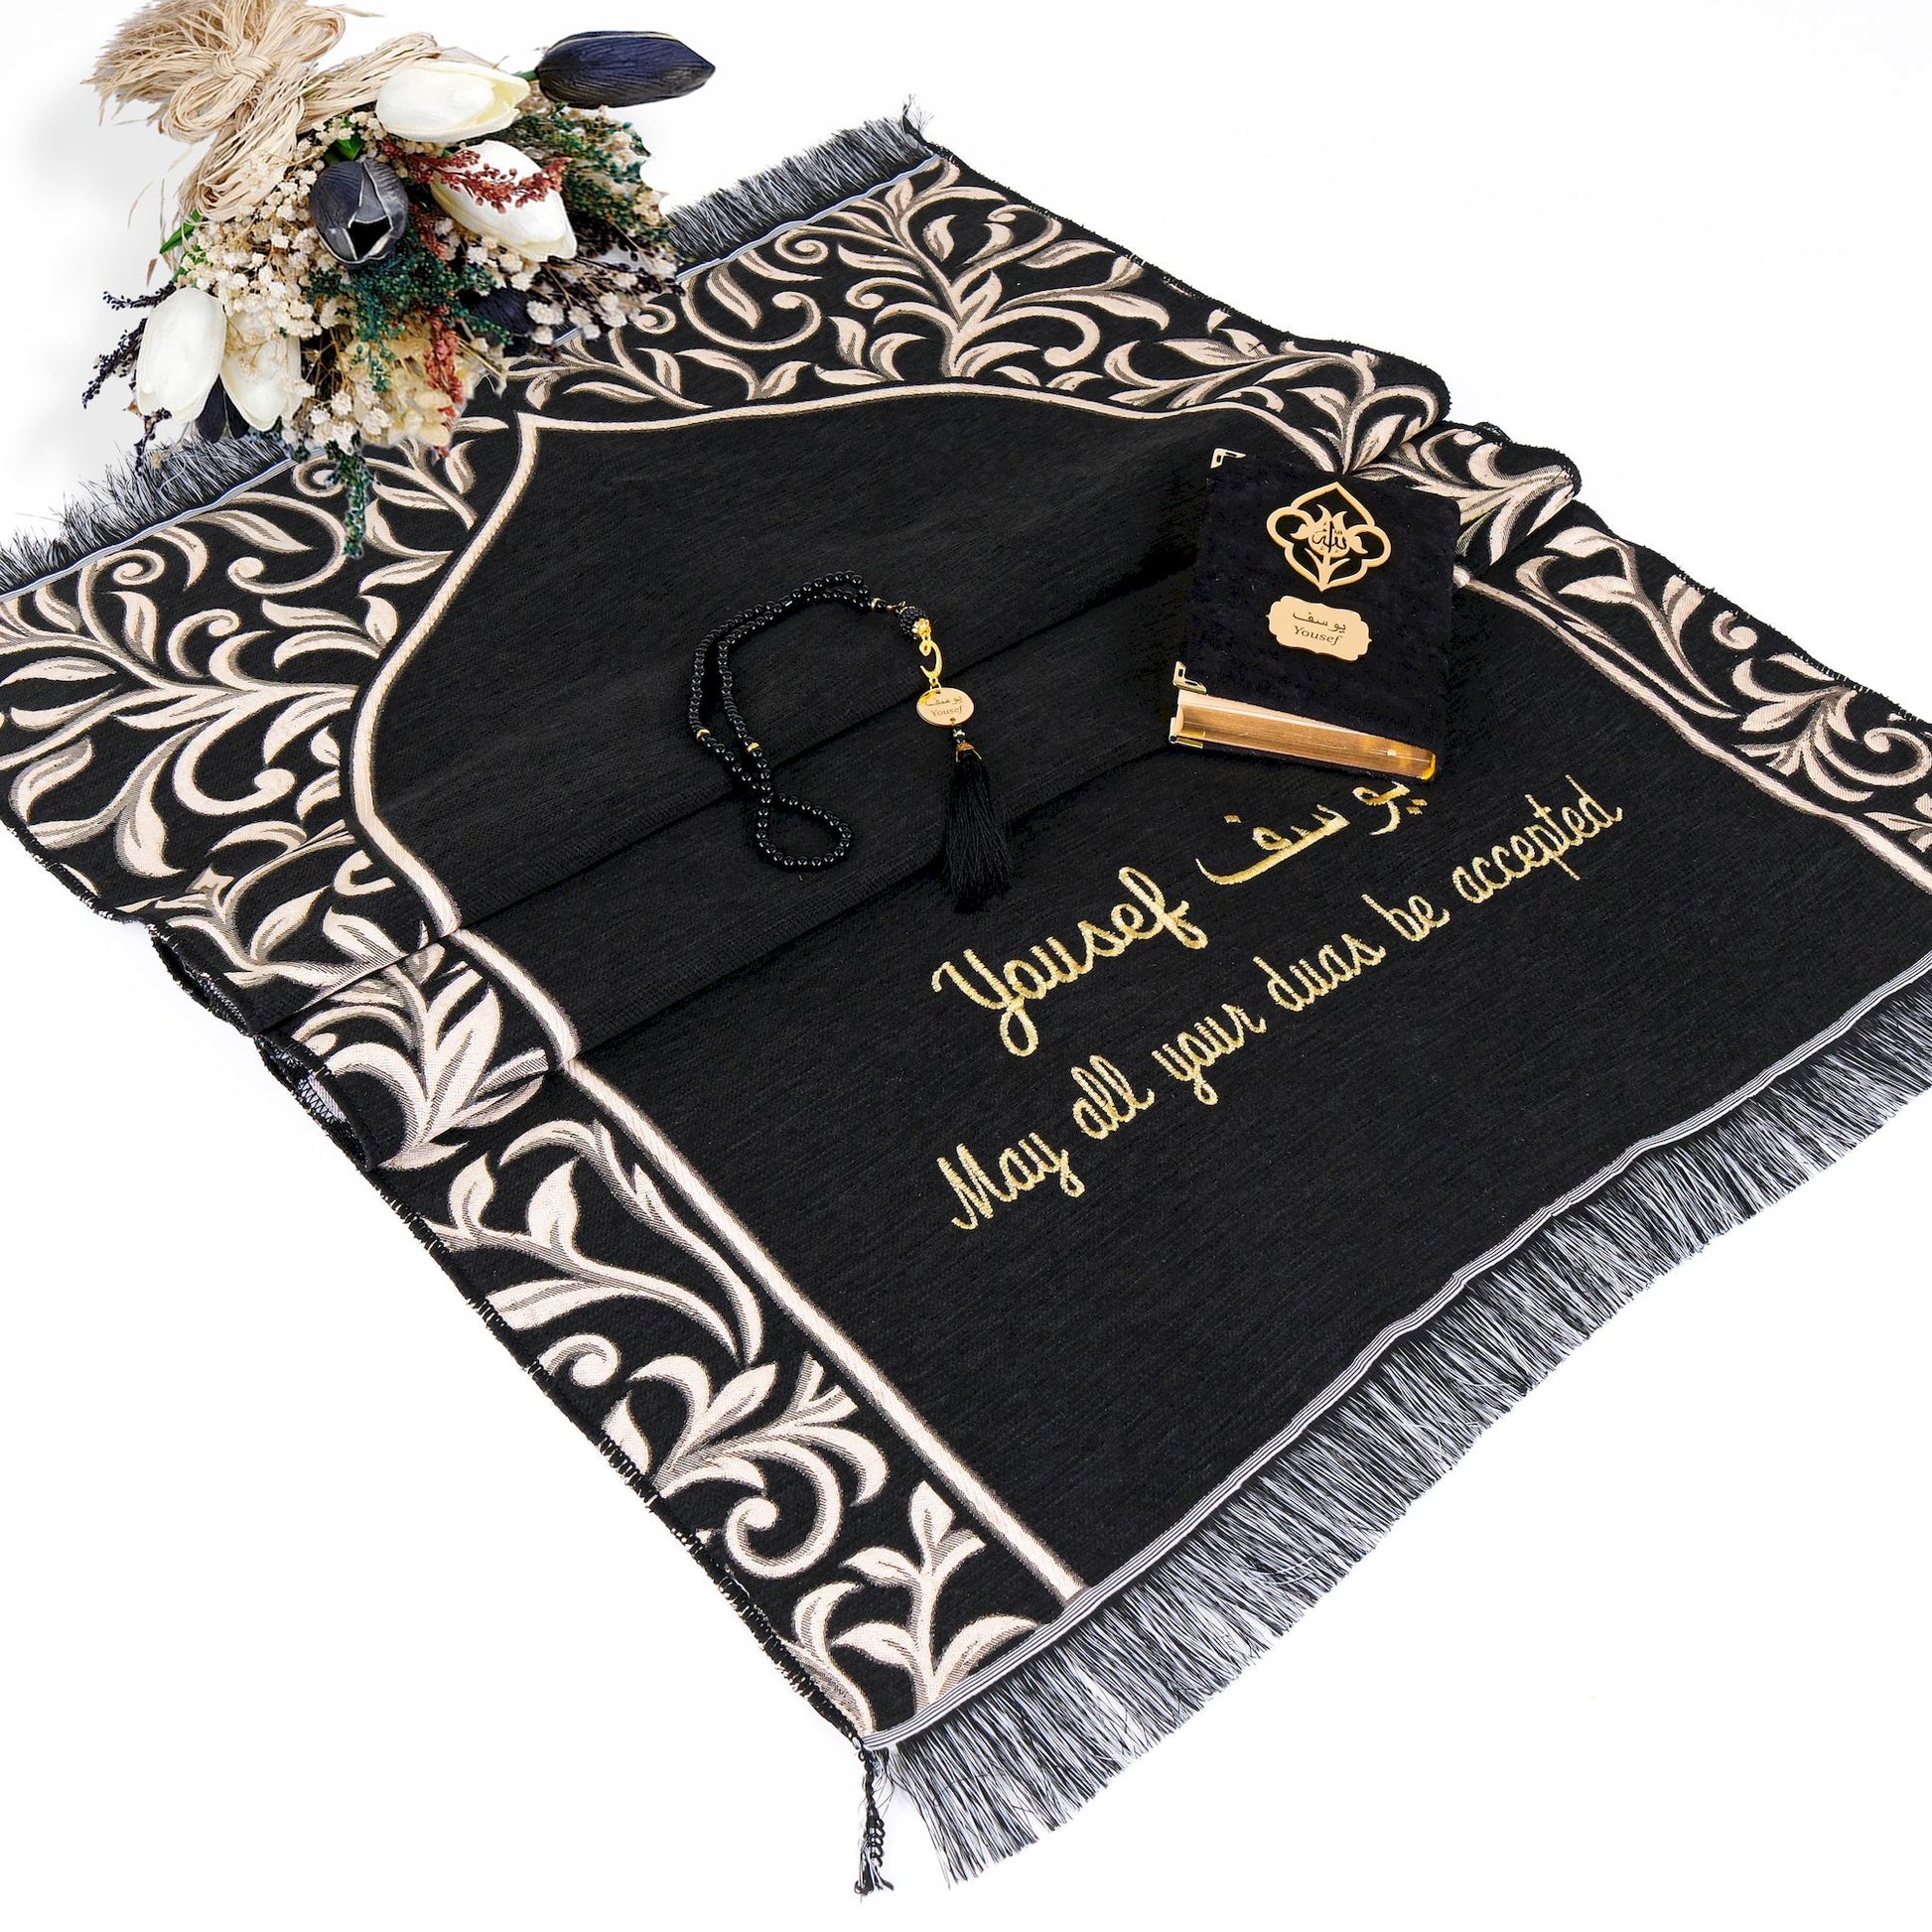 Personalized Flowery Prayer Mat Quran Tasbeeh Islamic Muslim Gift Set - Islamic Elite Favors is a handmade gift shop offering a wide variety of unique and personalized gifts for all occasions. Whether you're looking for the perfect Ramadan, Eid, Hajj, wedding gift or something special for a birthday, baby shower or anniversary, we have something for everyone. High quality, made with love.